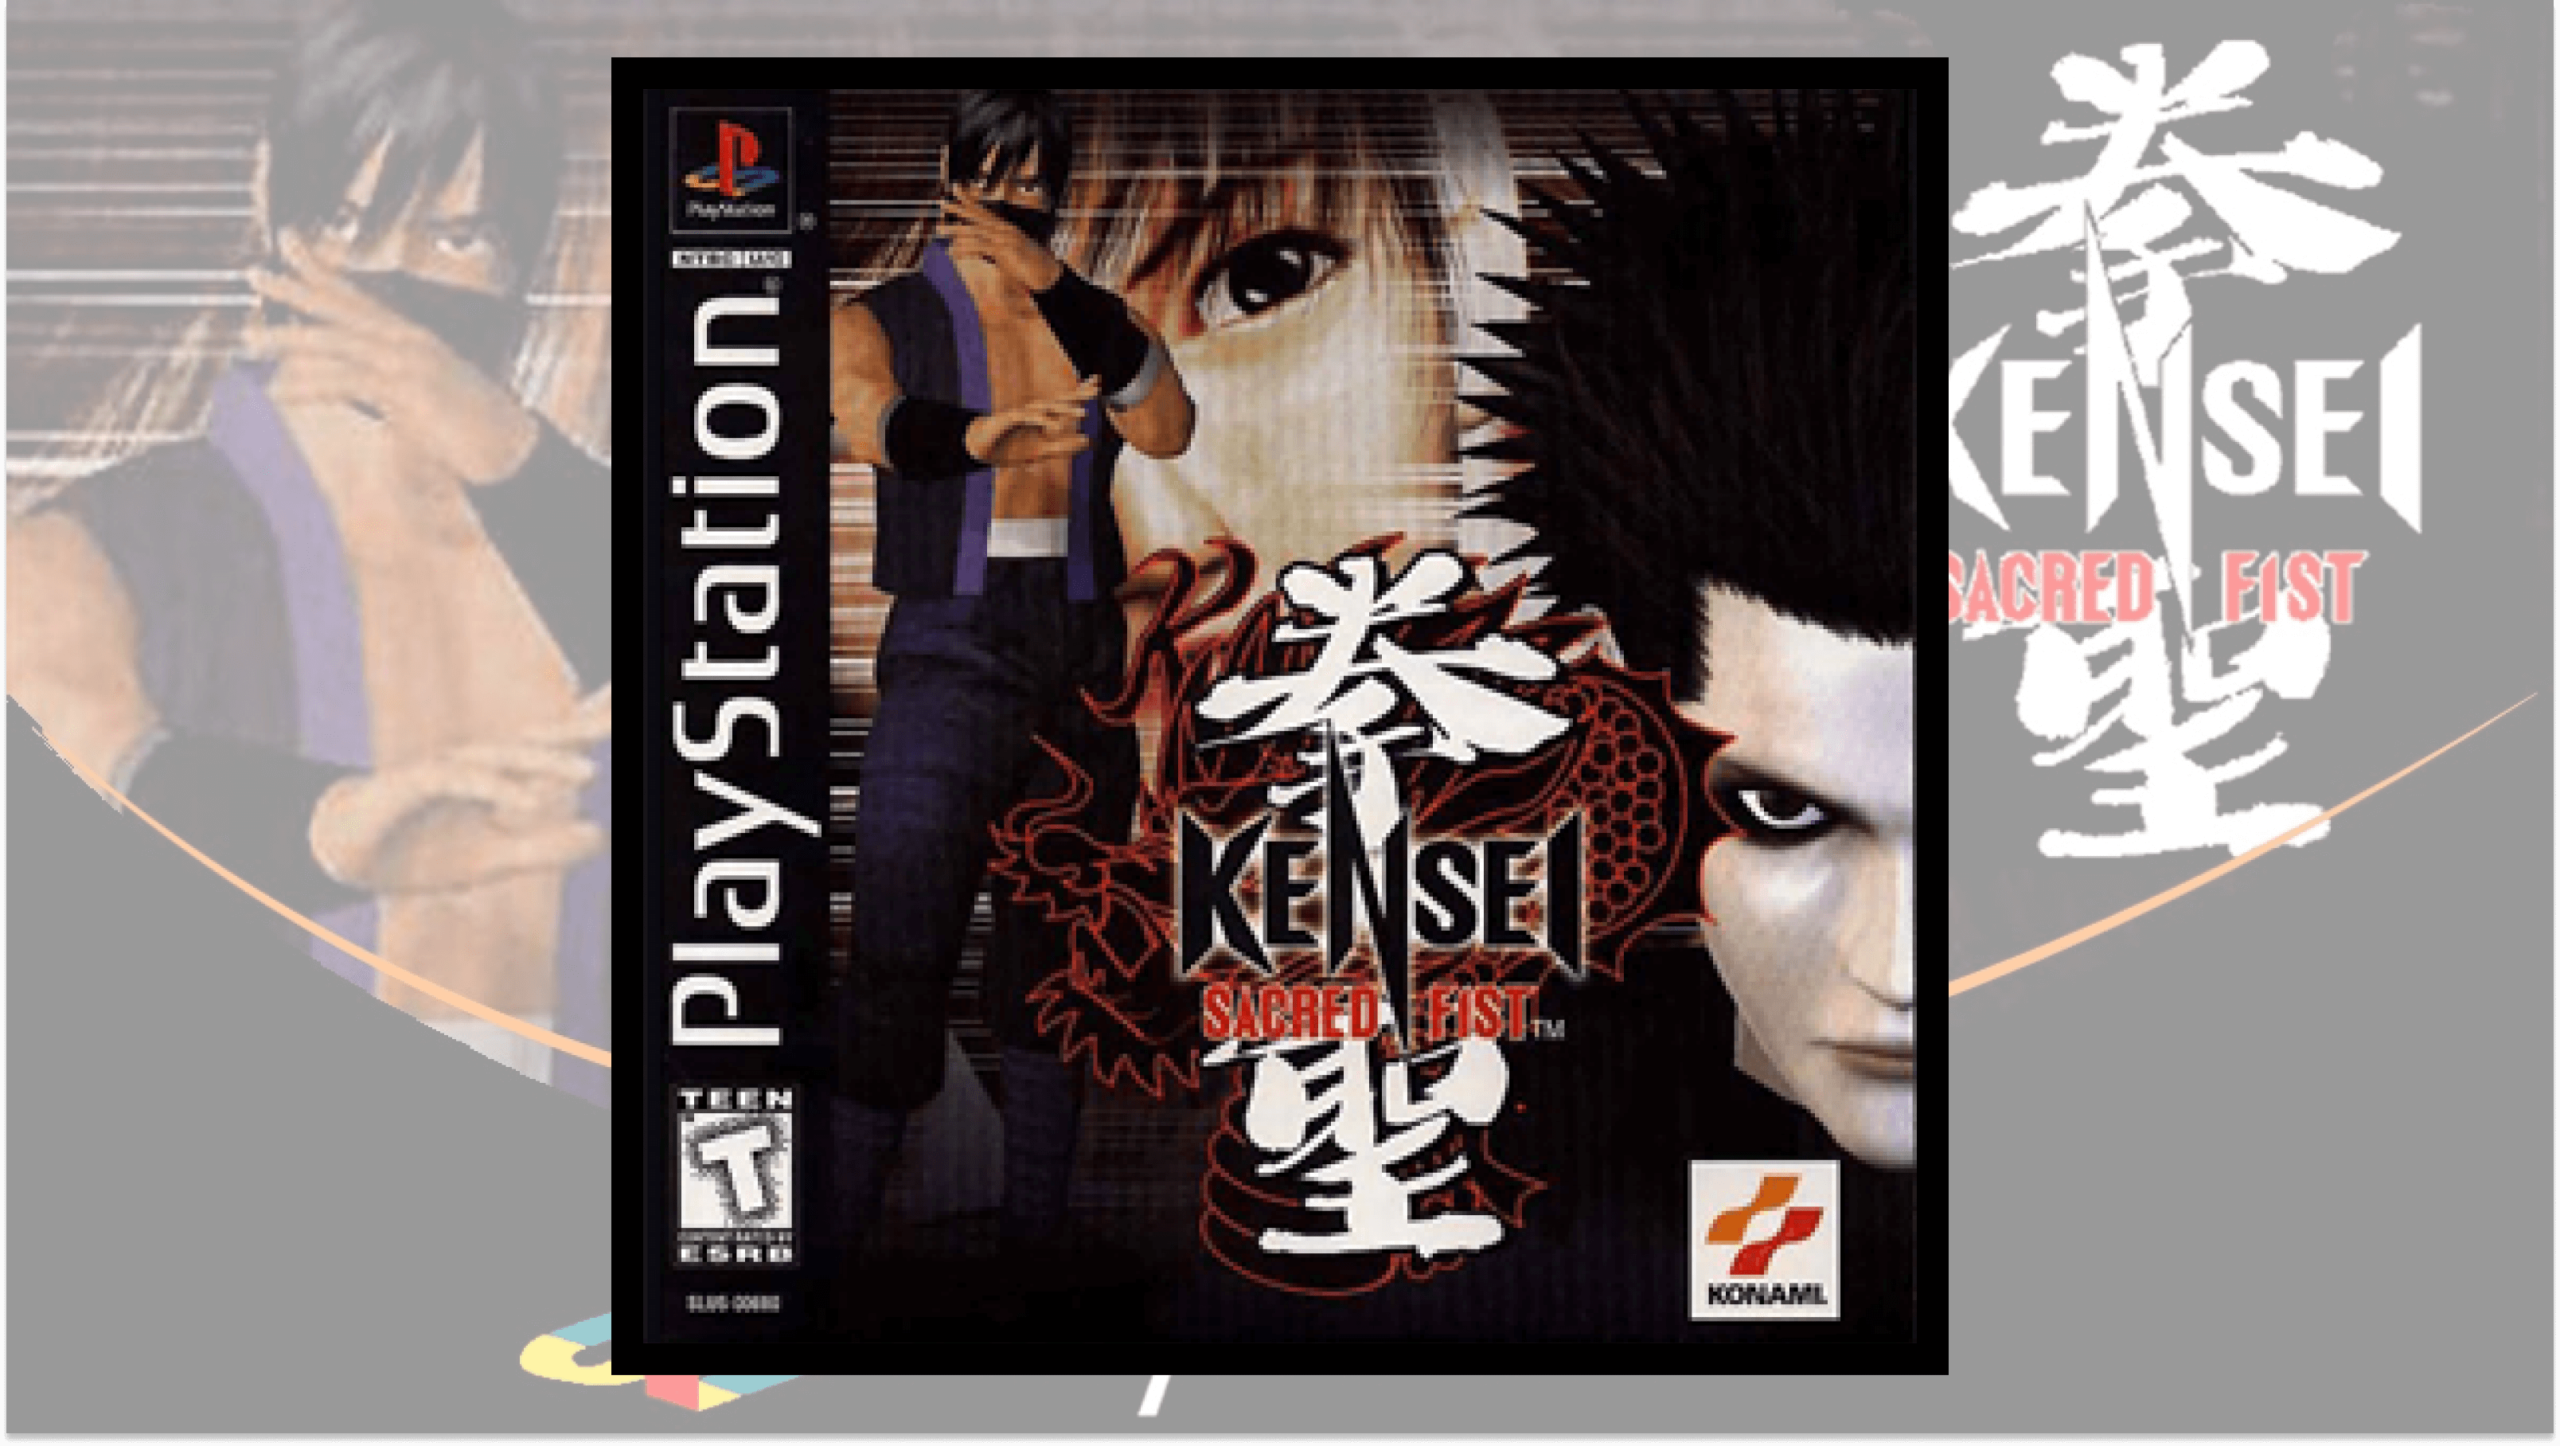 You are currently viewing Revisiting Kensei: Sacred Fist